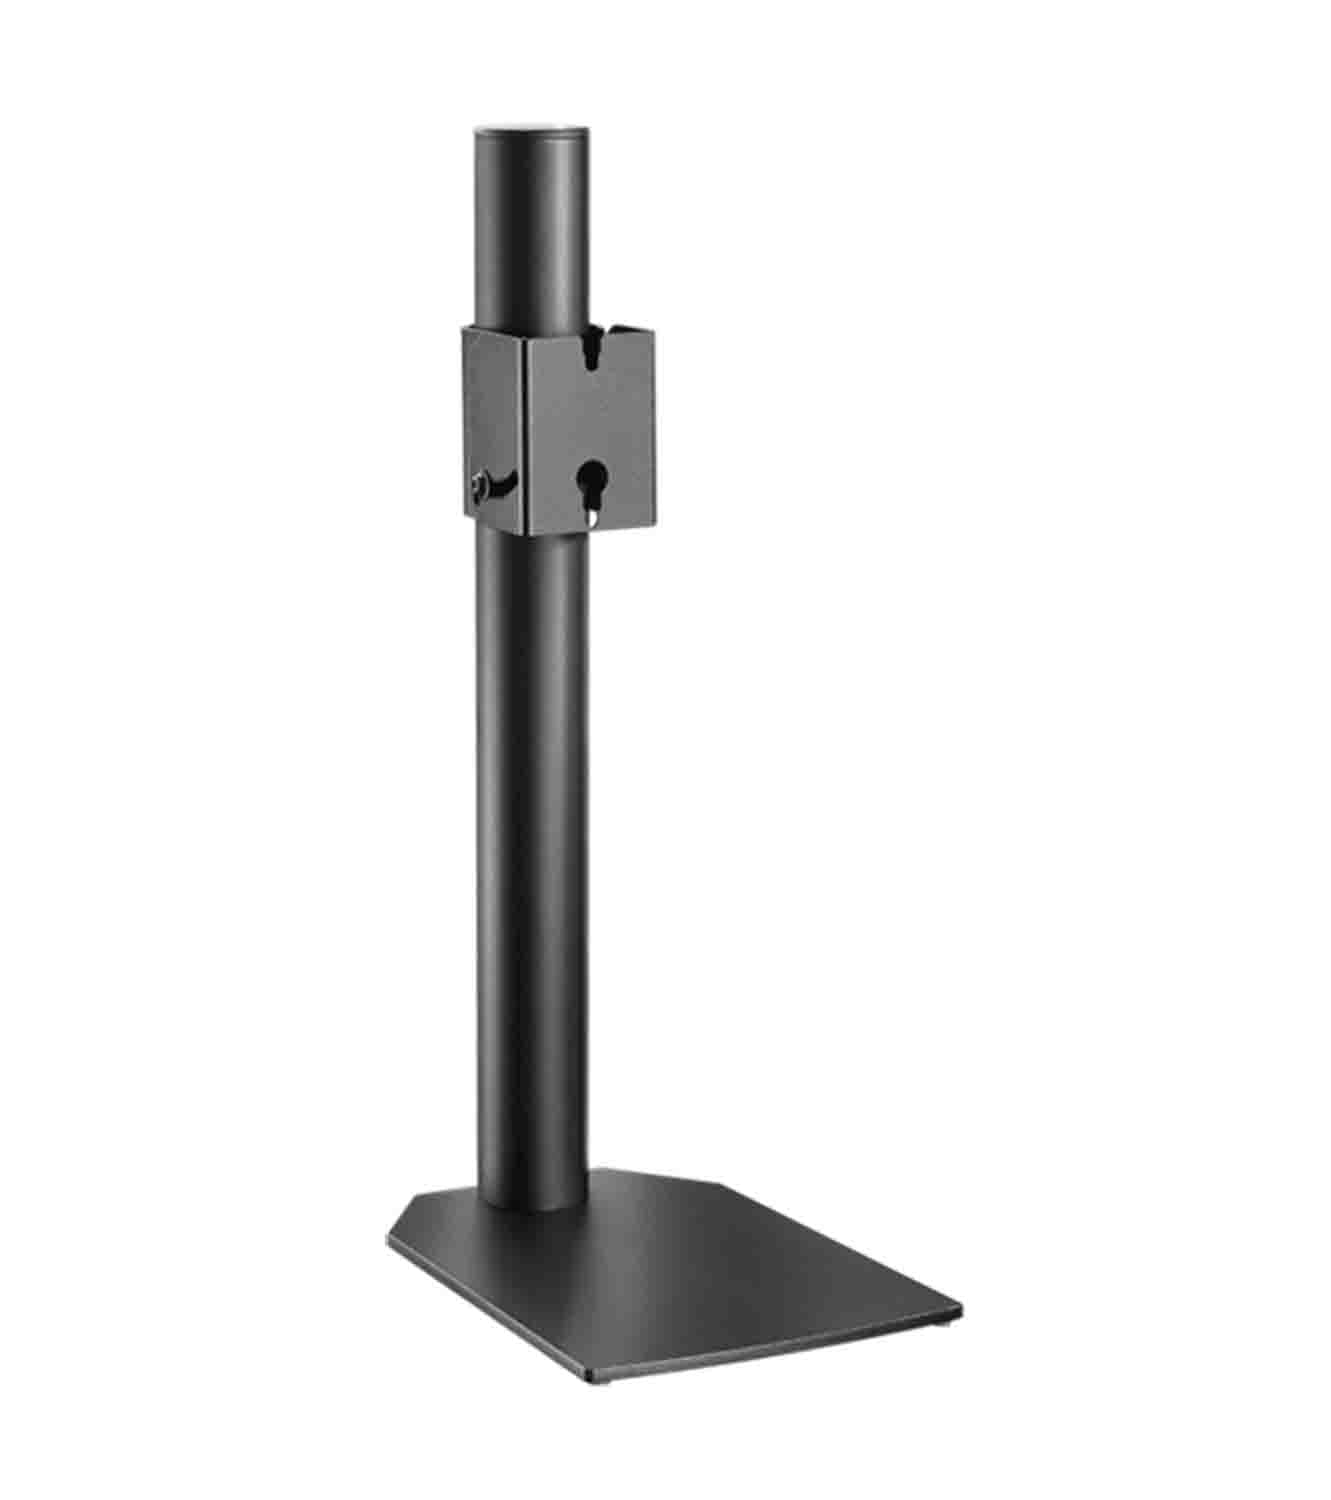 Neumann LH 65 Table Stand for KH 120 Monitor - Hollywood DJ